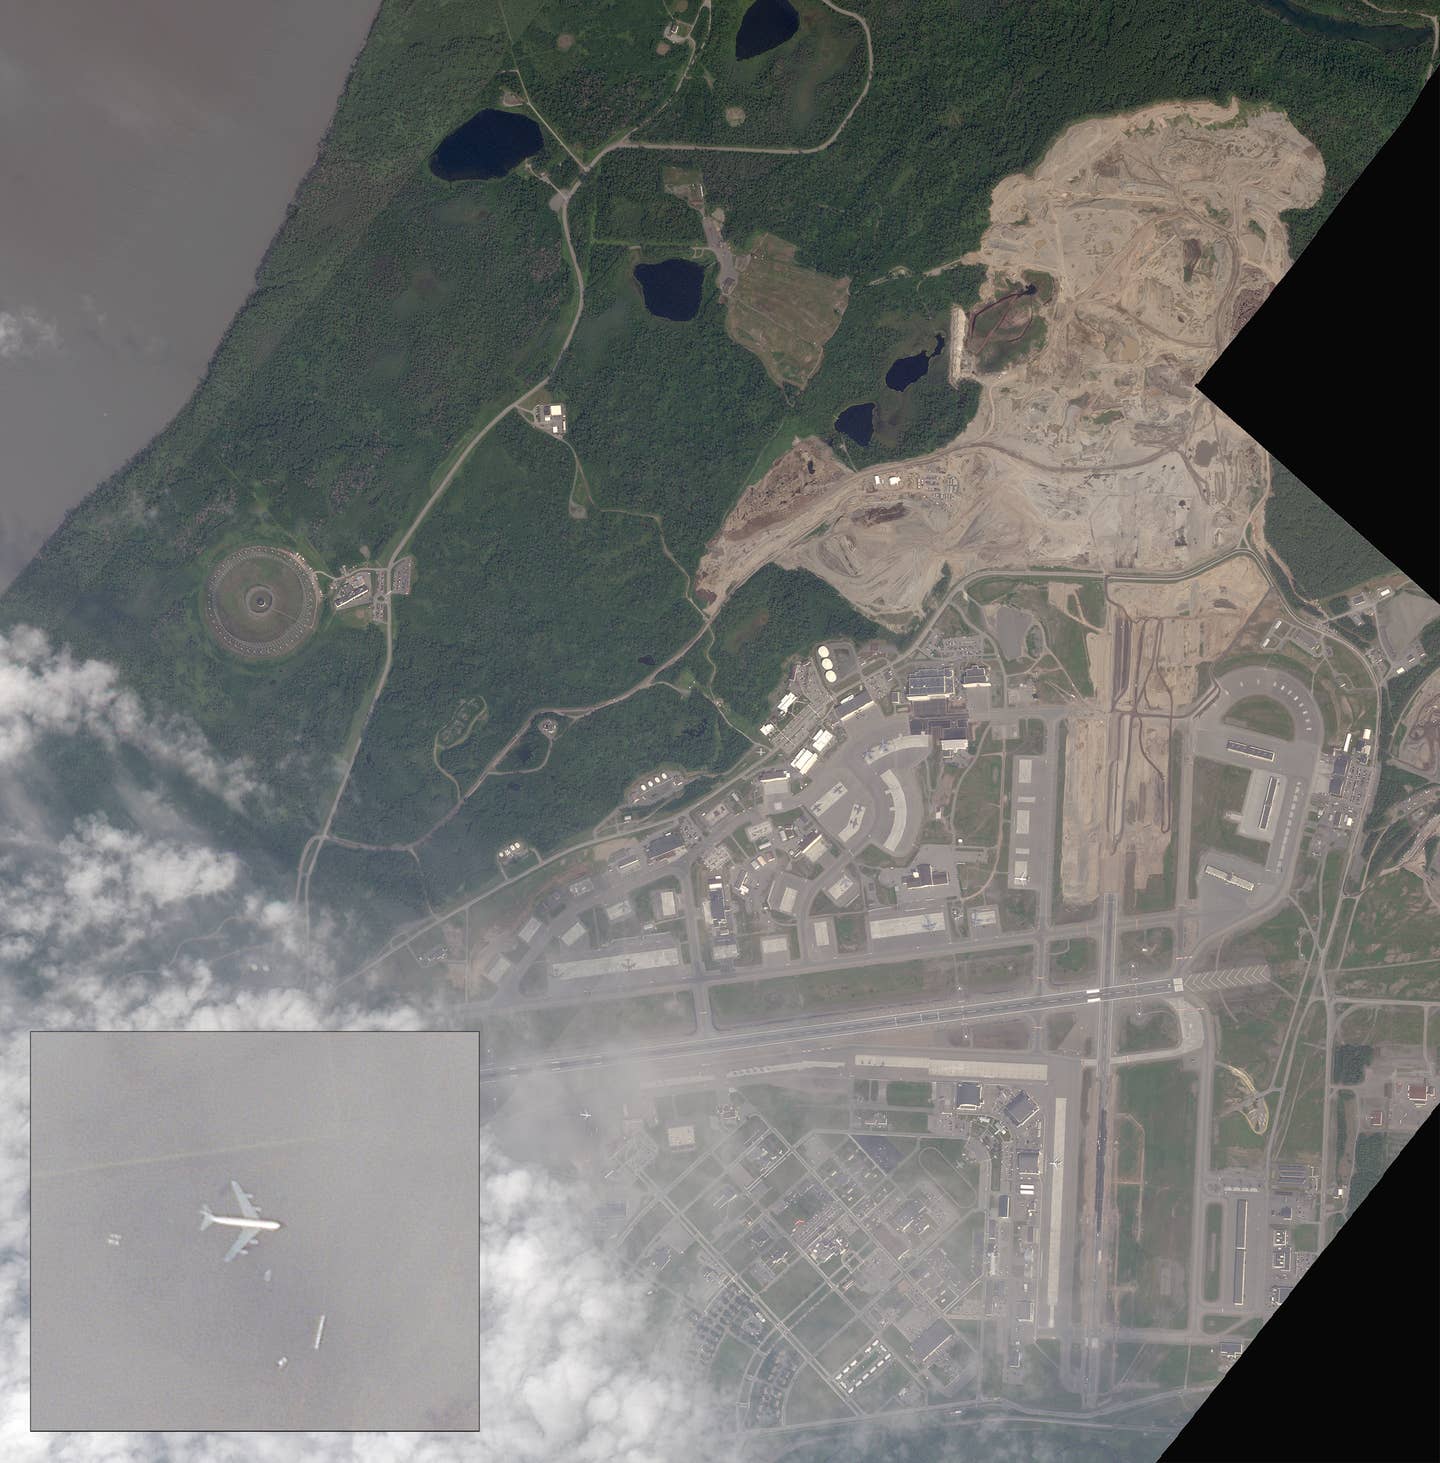 A satellite image of Elmendorf Air Force Base, formally part of  Joint Base Elmendorf-Richardson, taken on July 24th, 2023. Evidence of the runway extension "mega-project" is plainly visible at the northeastern end of the base. You can see an RC-135 Rivet Joint sitting on the southwest ramp area as well. <em><em>PHOTO © 2023 PLANET LABS INC. ALL RIGHTS RESERVED. REPRINTED BY PERMISSION</em></em>